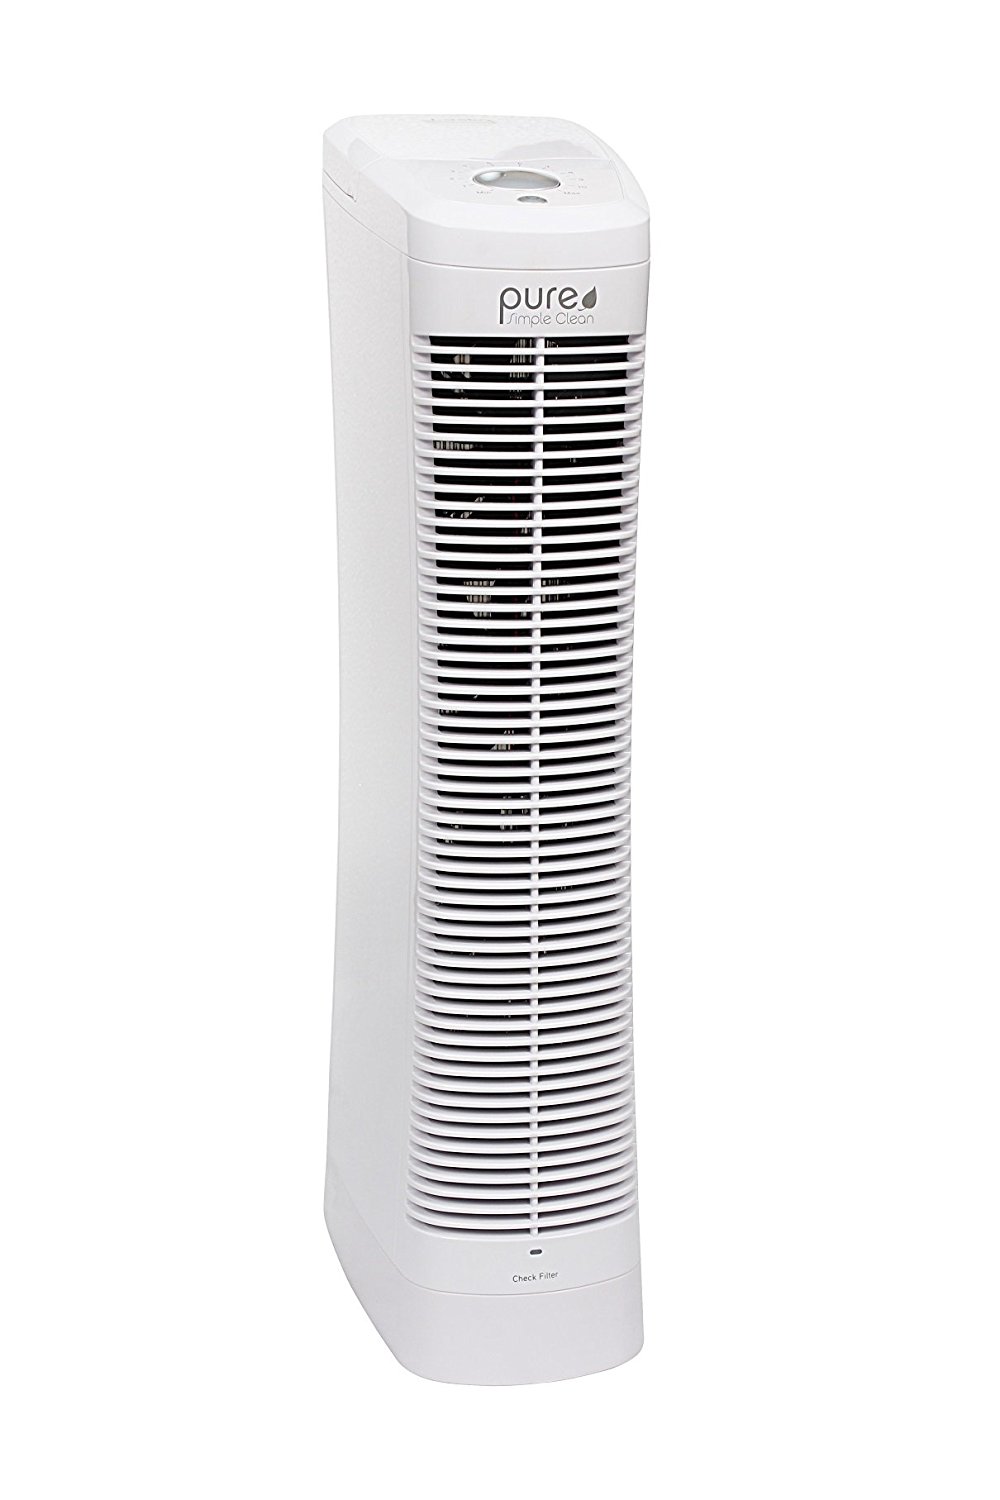 List of best Air Purifiers in India under Rs. 10,000 and Rs. 20,000